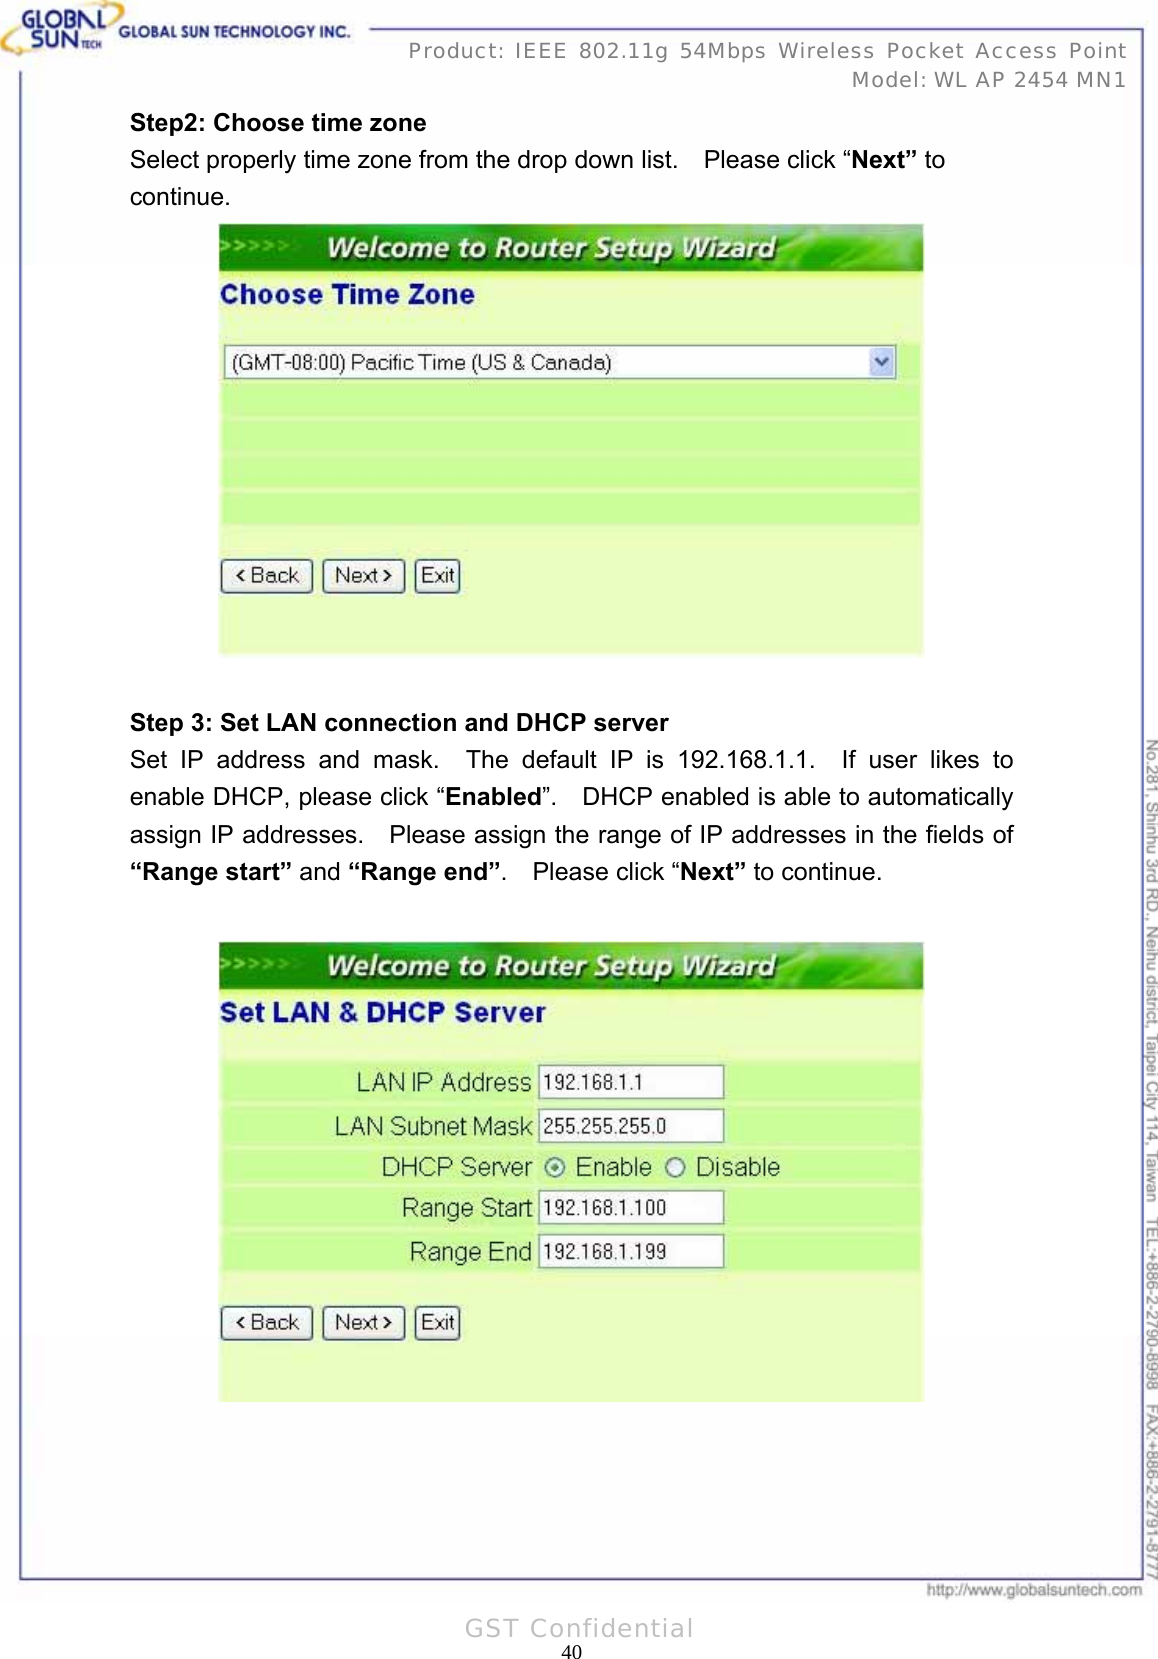   40Product: IEEE 802.11g 54Mbps Wireless Pocket Access Point Model: WL AP 2454 MN1GST Confidential Step2: Choose time zone Select properly time zone from the drop down list.    Please click “Next” to continue.   Step 3: Set LAN connection and DHCP server Set IP address and mask.  The default IP is 192.168.1.1.  If user likes to enable DHCP, please click “Enabled”.    DHCP enabled is able to automatically assign IP addresses.    Please assign the range of IP addresses in the fields of “Range start” and “Range end”.  Please click “Next” to continue.    